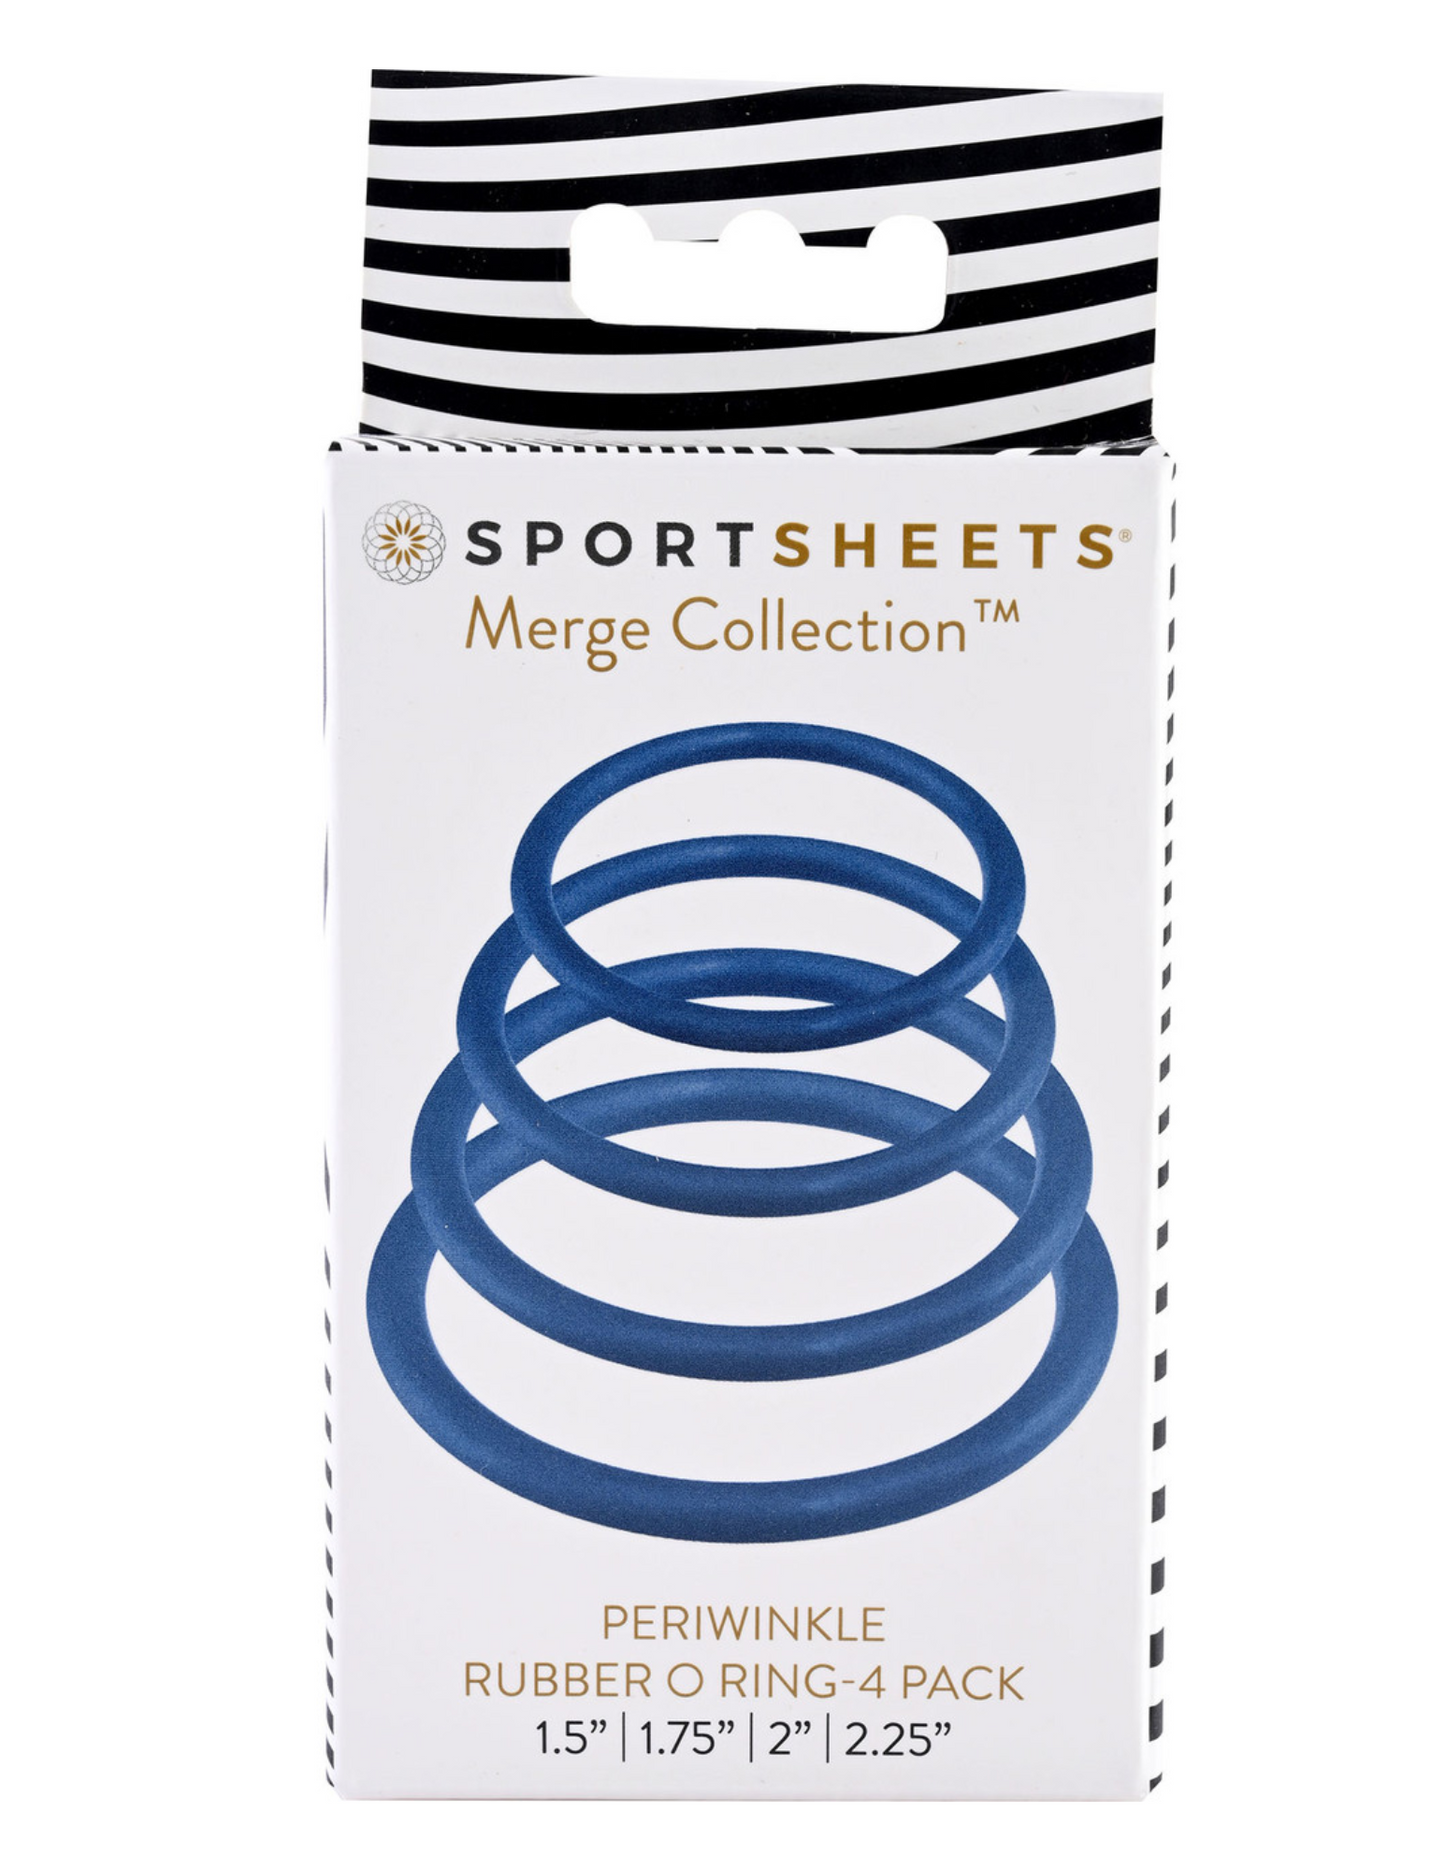 Photo of the box for the Merge Collection Rubber O-Ring (periwinkle) from Sportsheets.